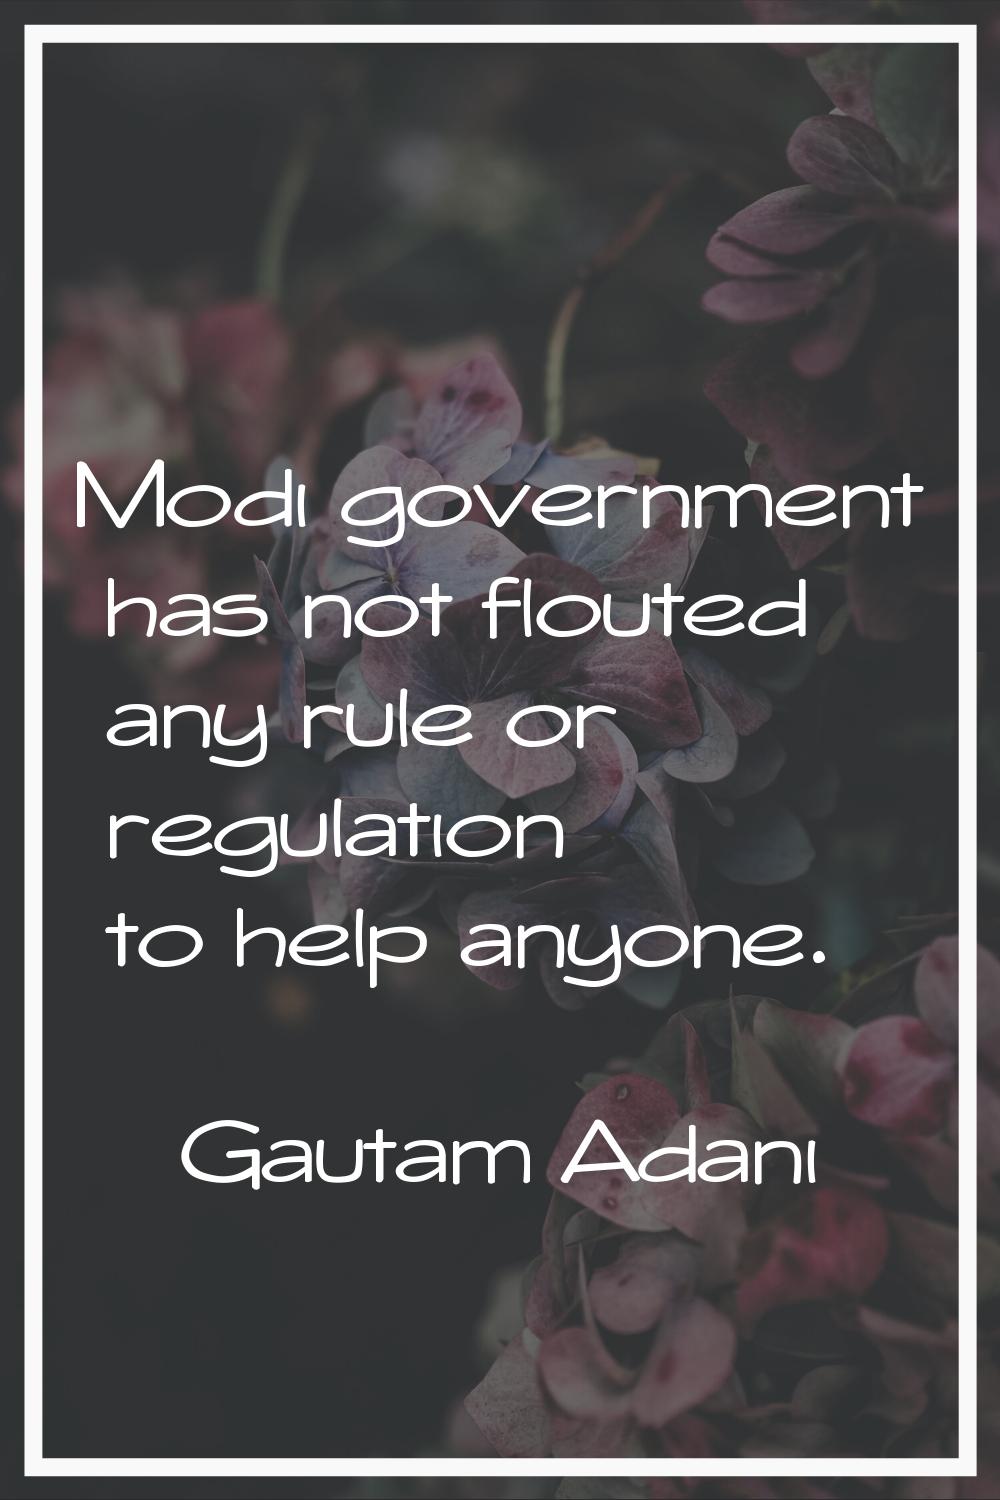 Modi government has not flouted any rule or regulation to help anyone.